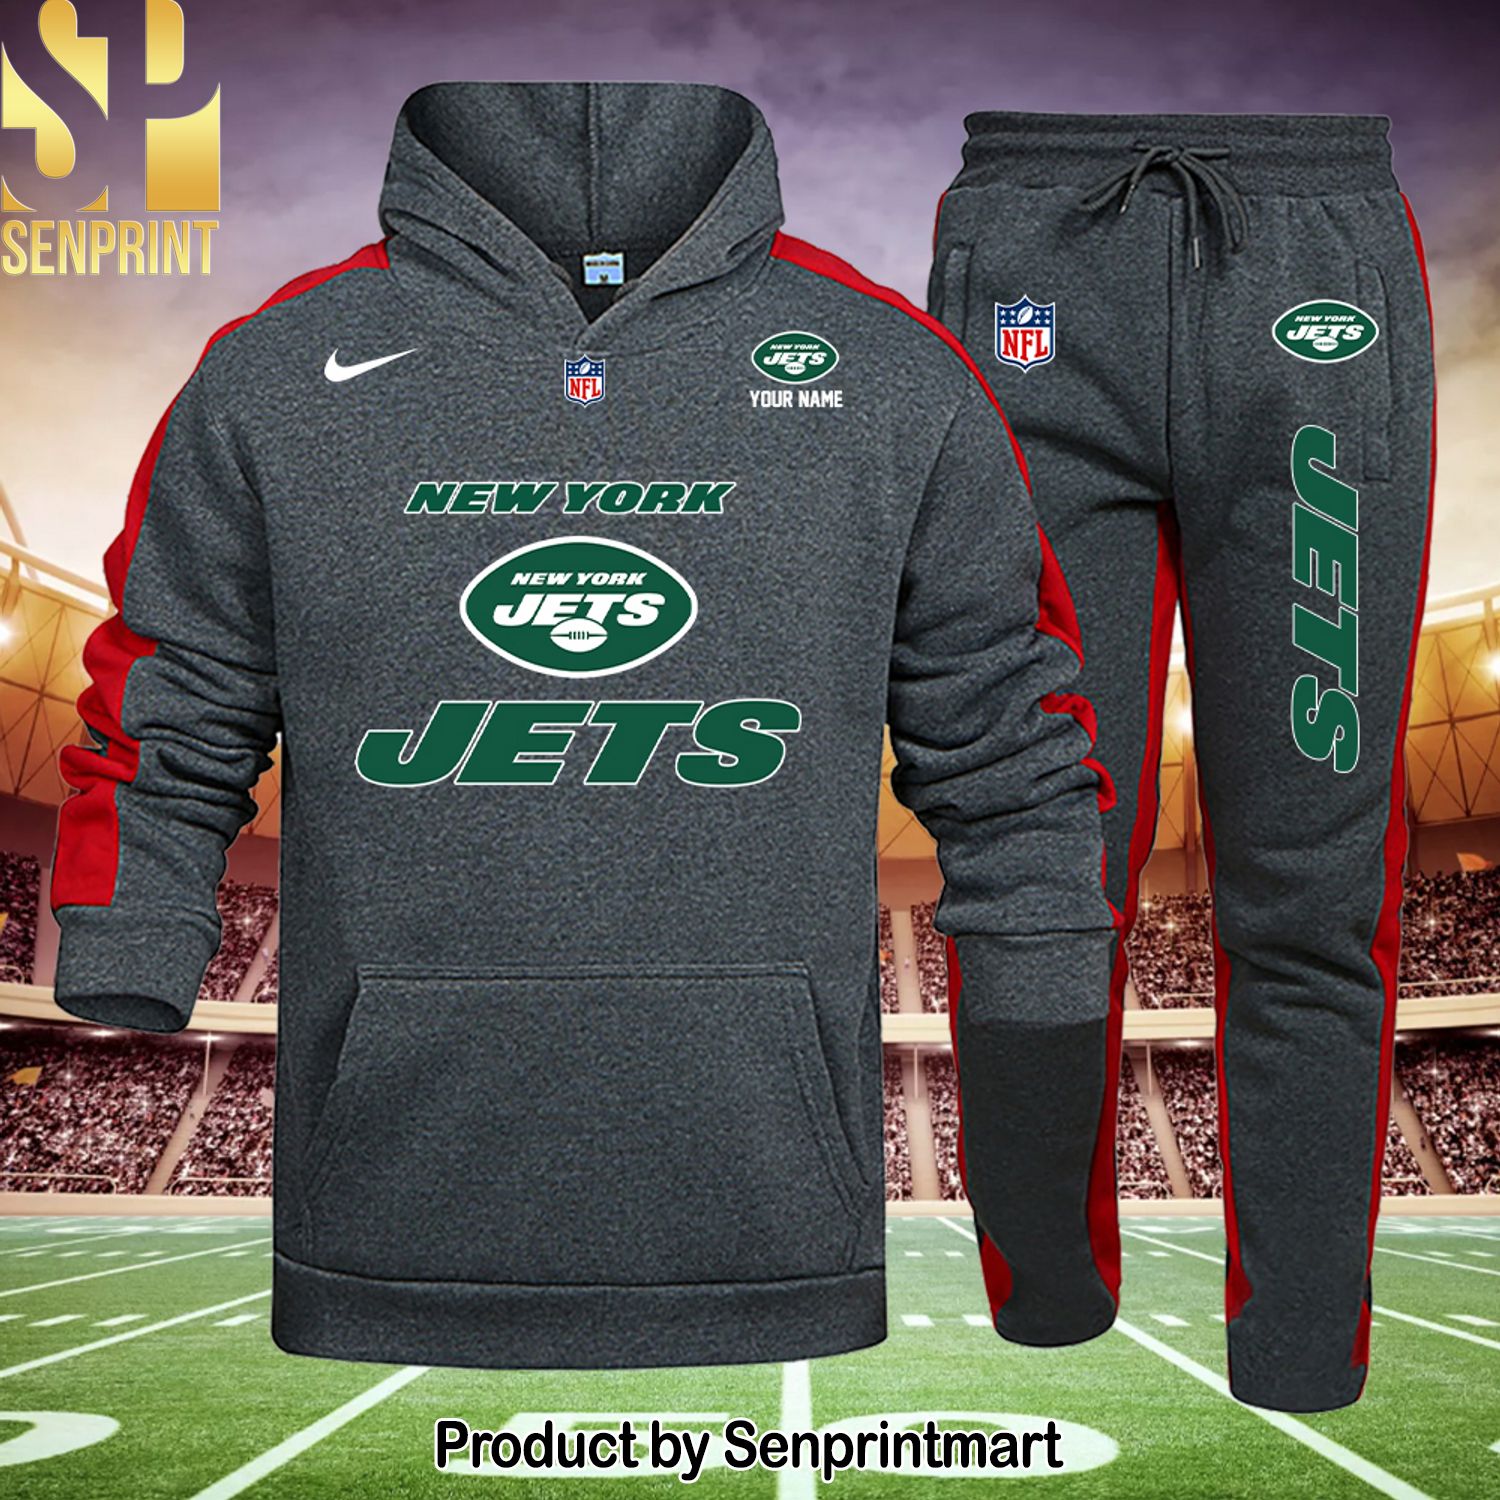 New York Jets 3D Shirt and Pants